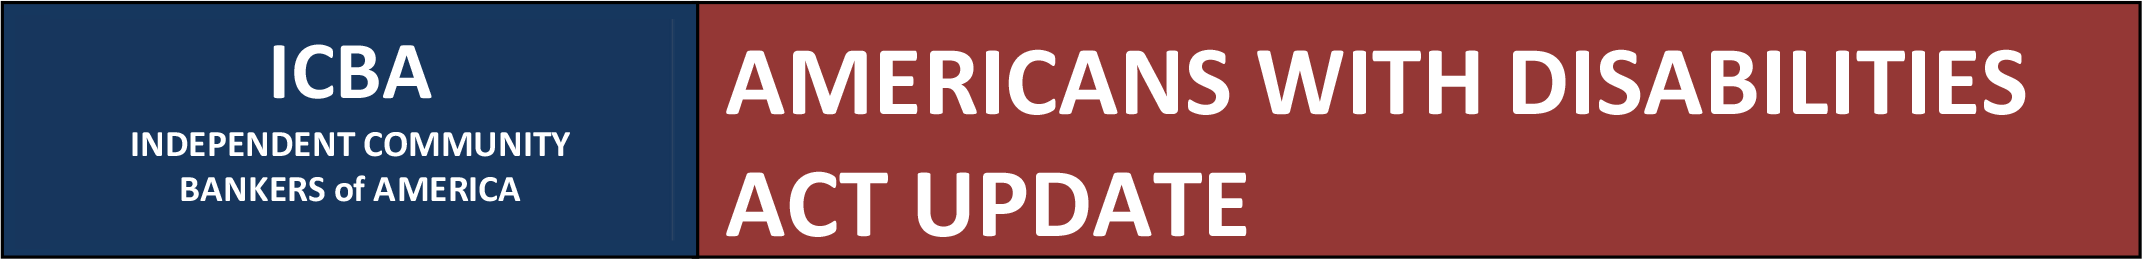 ICBA - Independent Community Bankers of America - Americans with Disabilities Act Update 